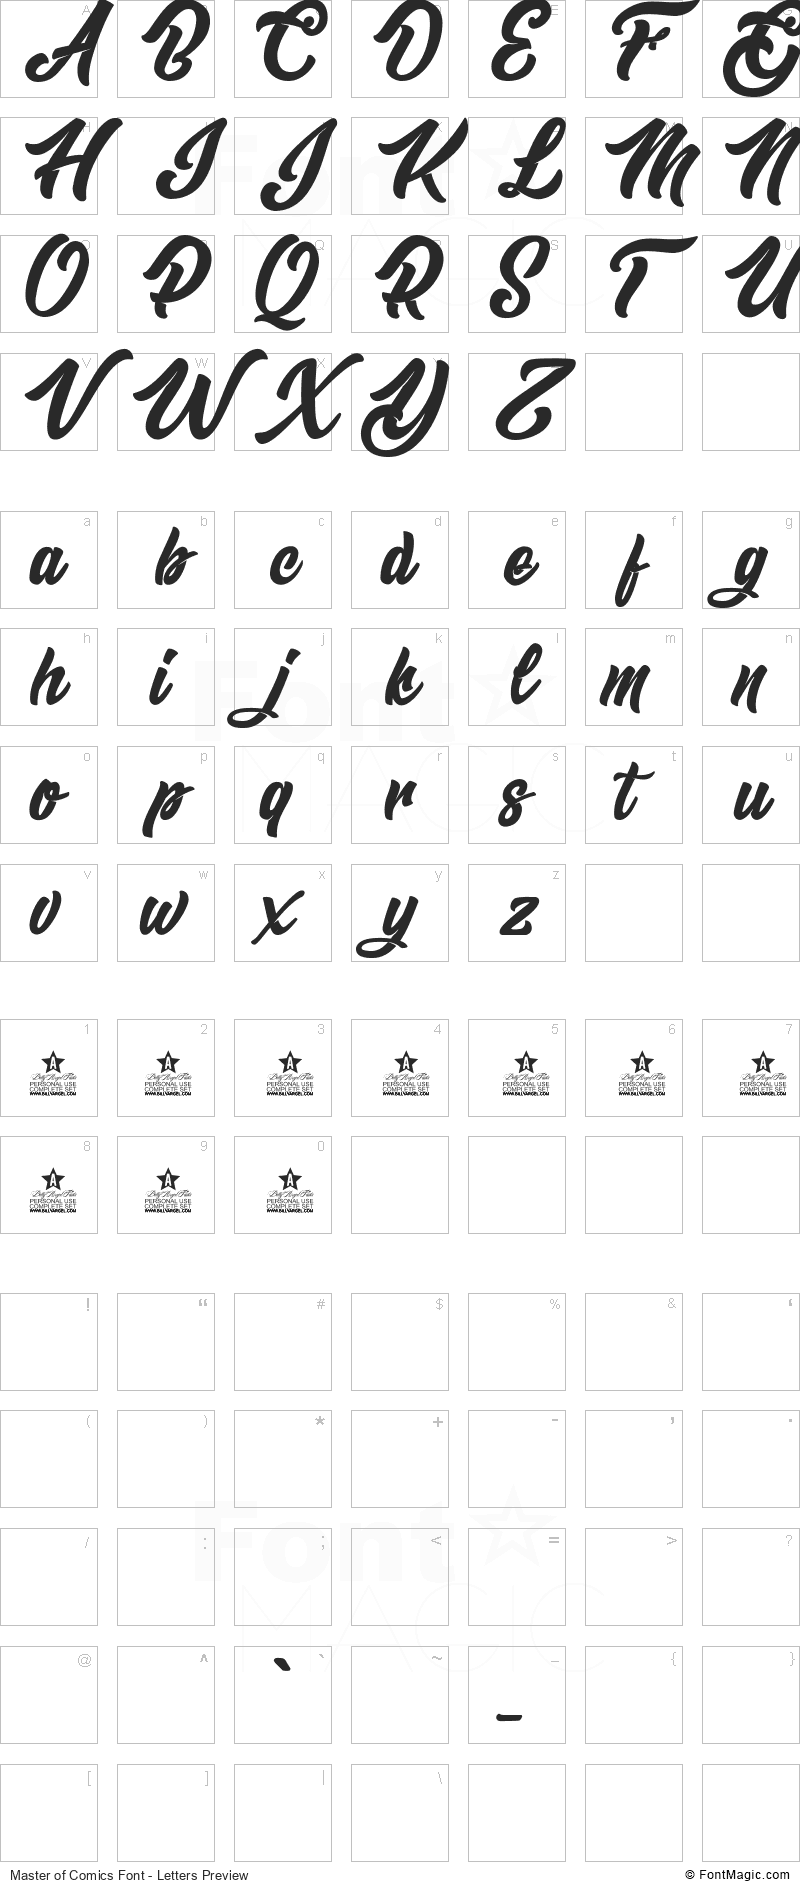 Master of Comics Font - All Latters Preview Chart